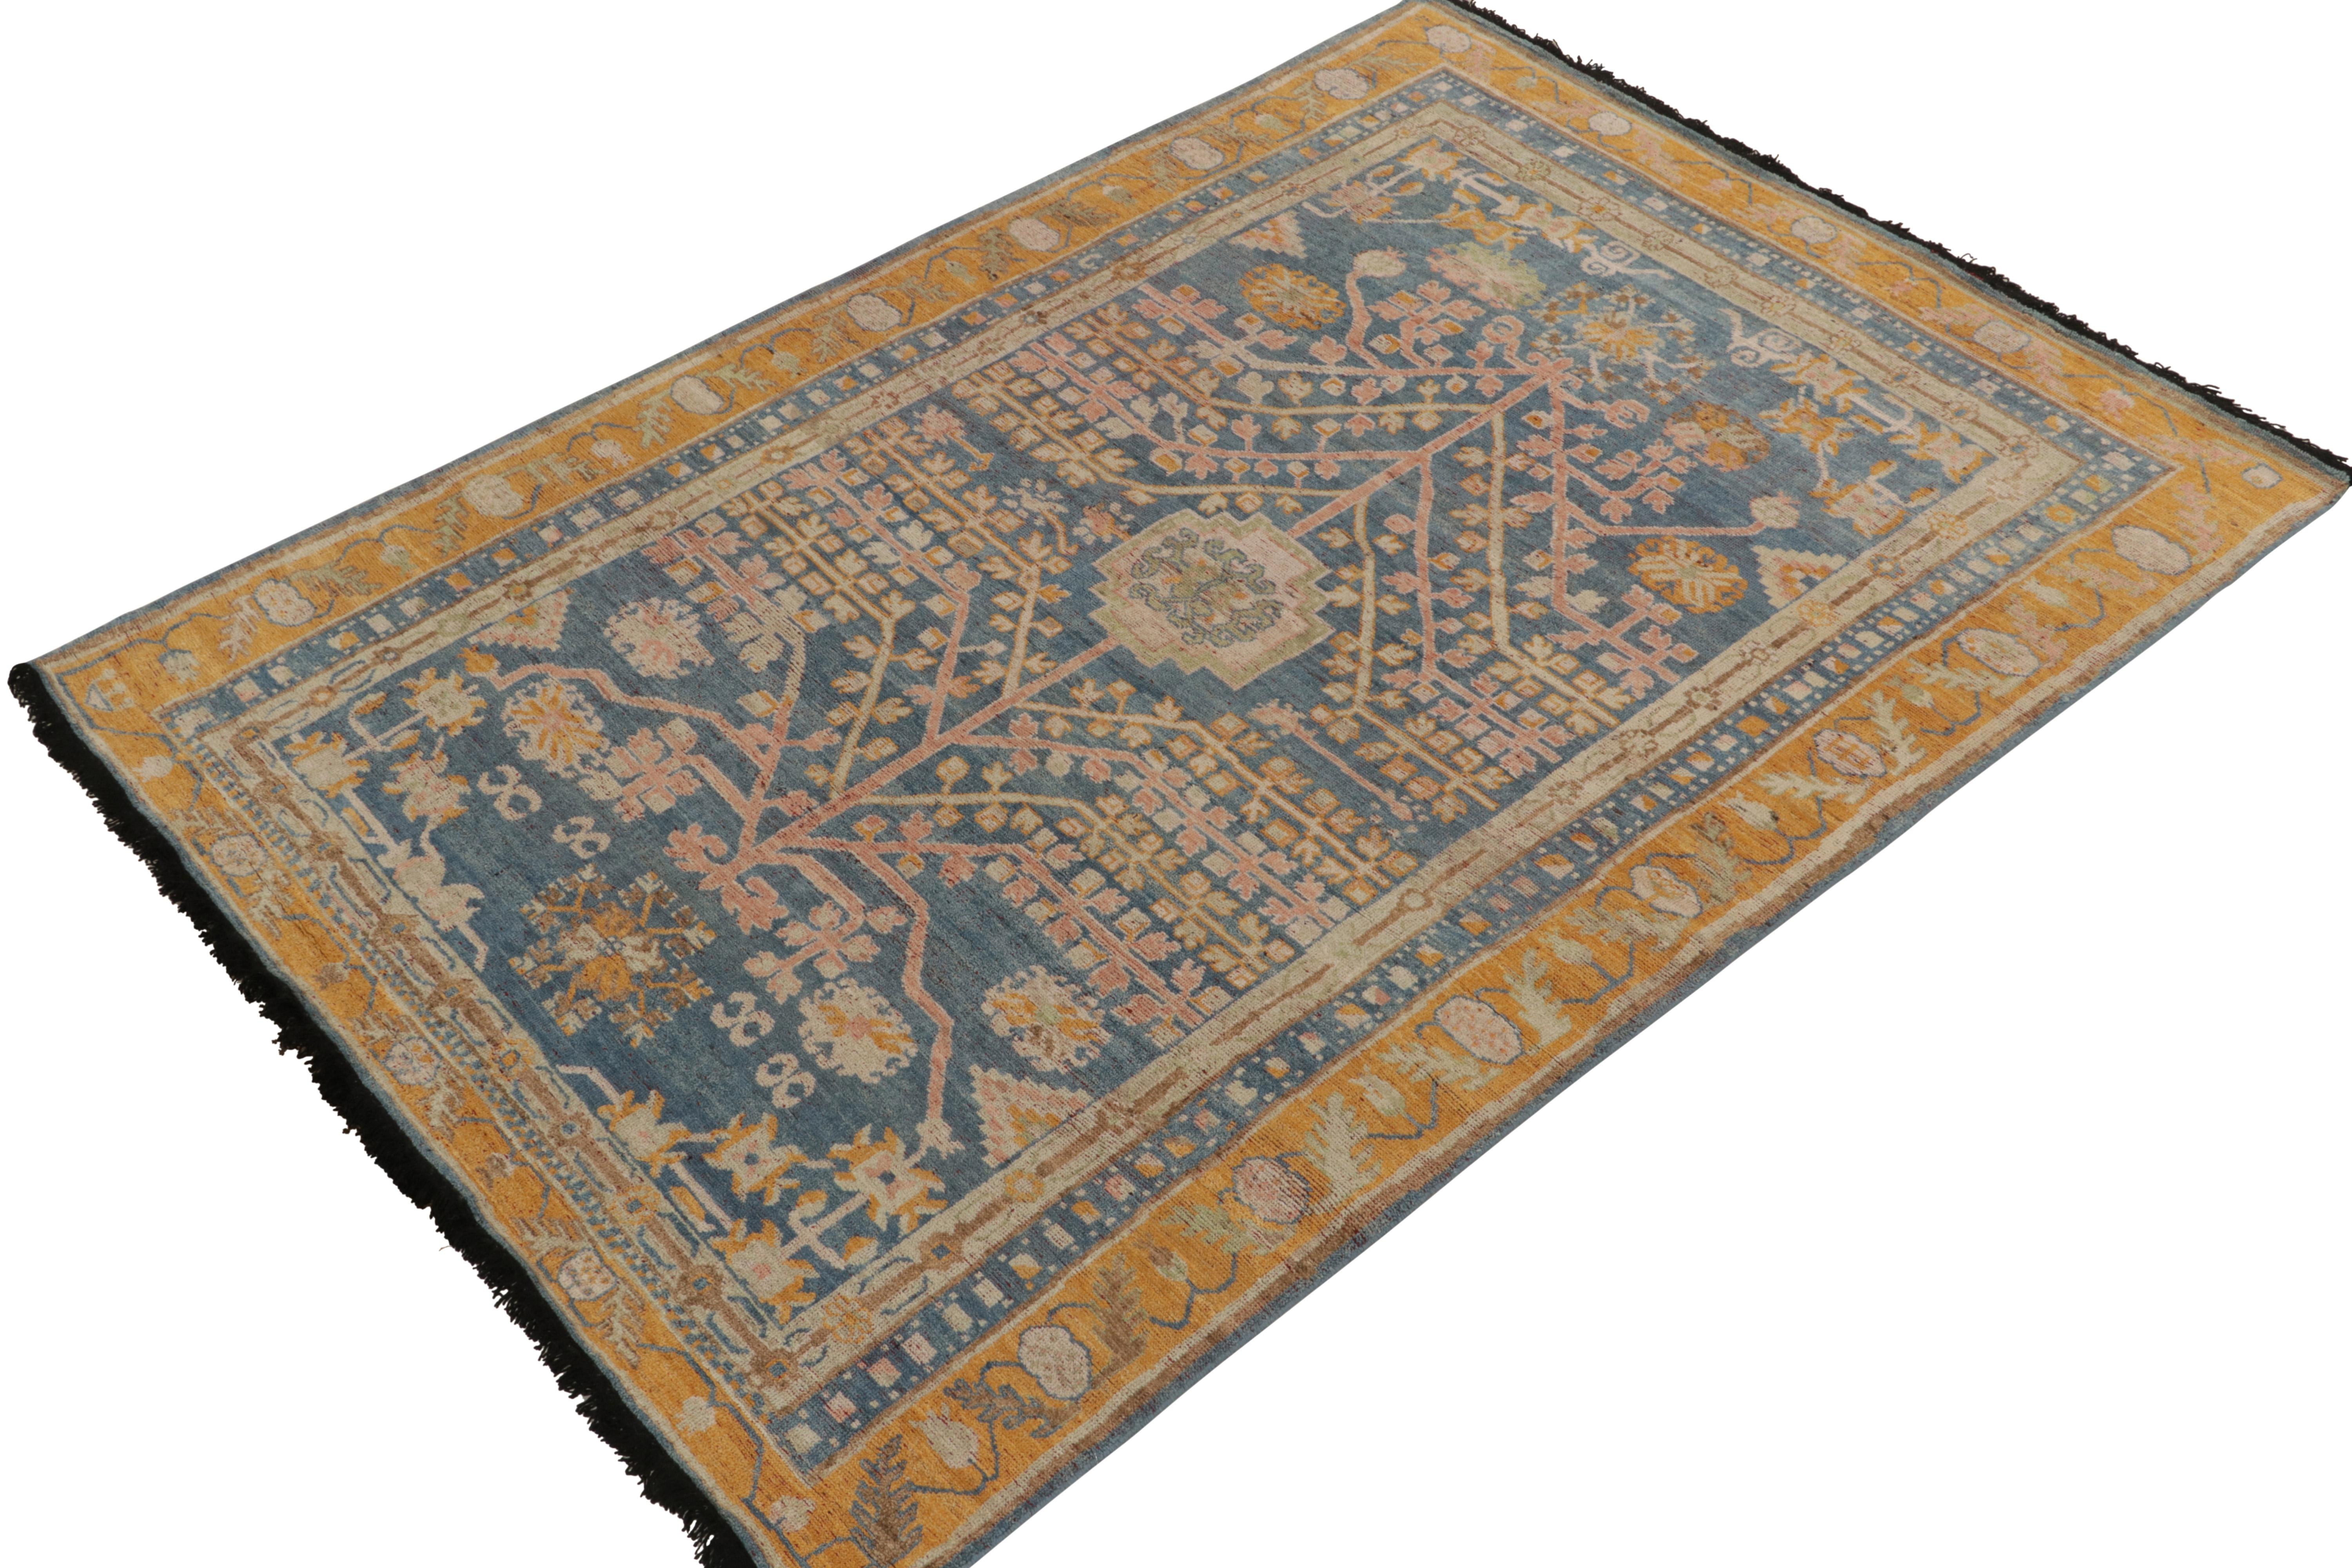 Hand-knotted in the softest wool, this 6x9 rug from our Burano collection is particularly inspired by antique Khotan-Samarkand rugs. 

A versatile scale enjoys geometric-floral patterns in blue, gold and pink allusions to pomegranate designs